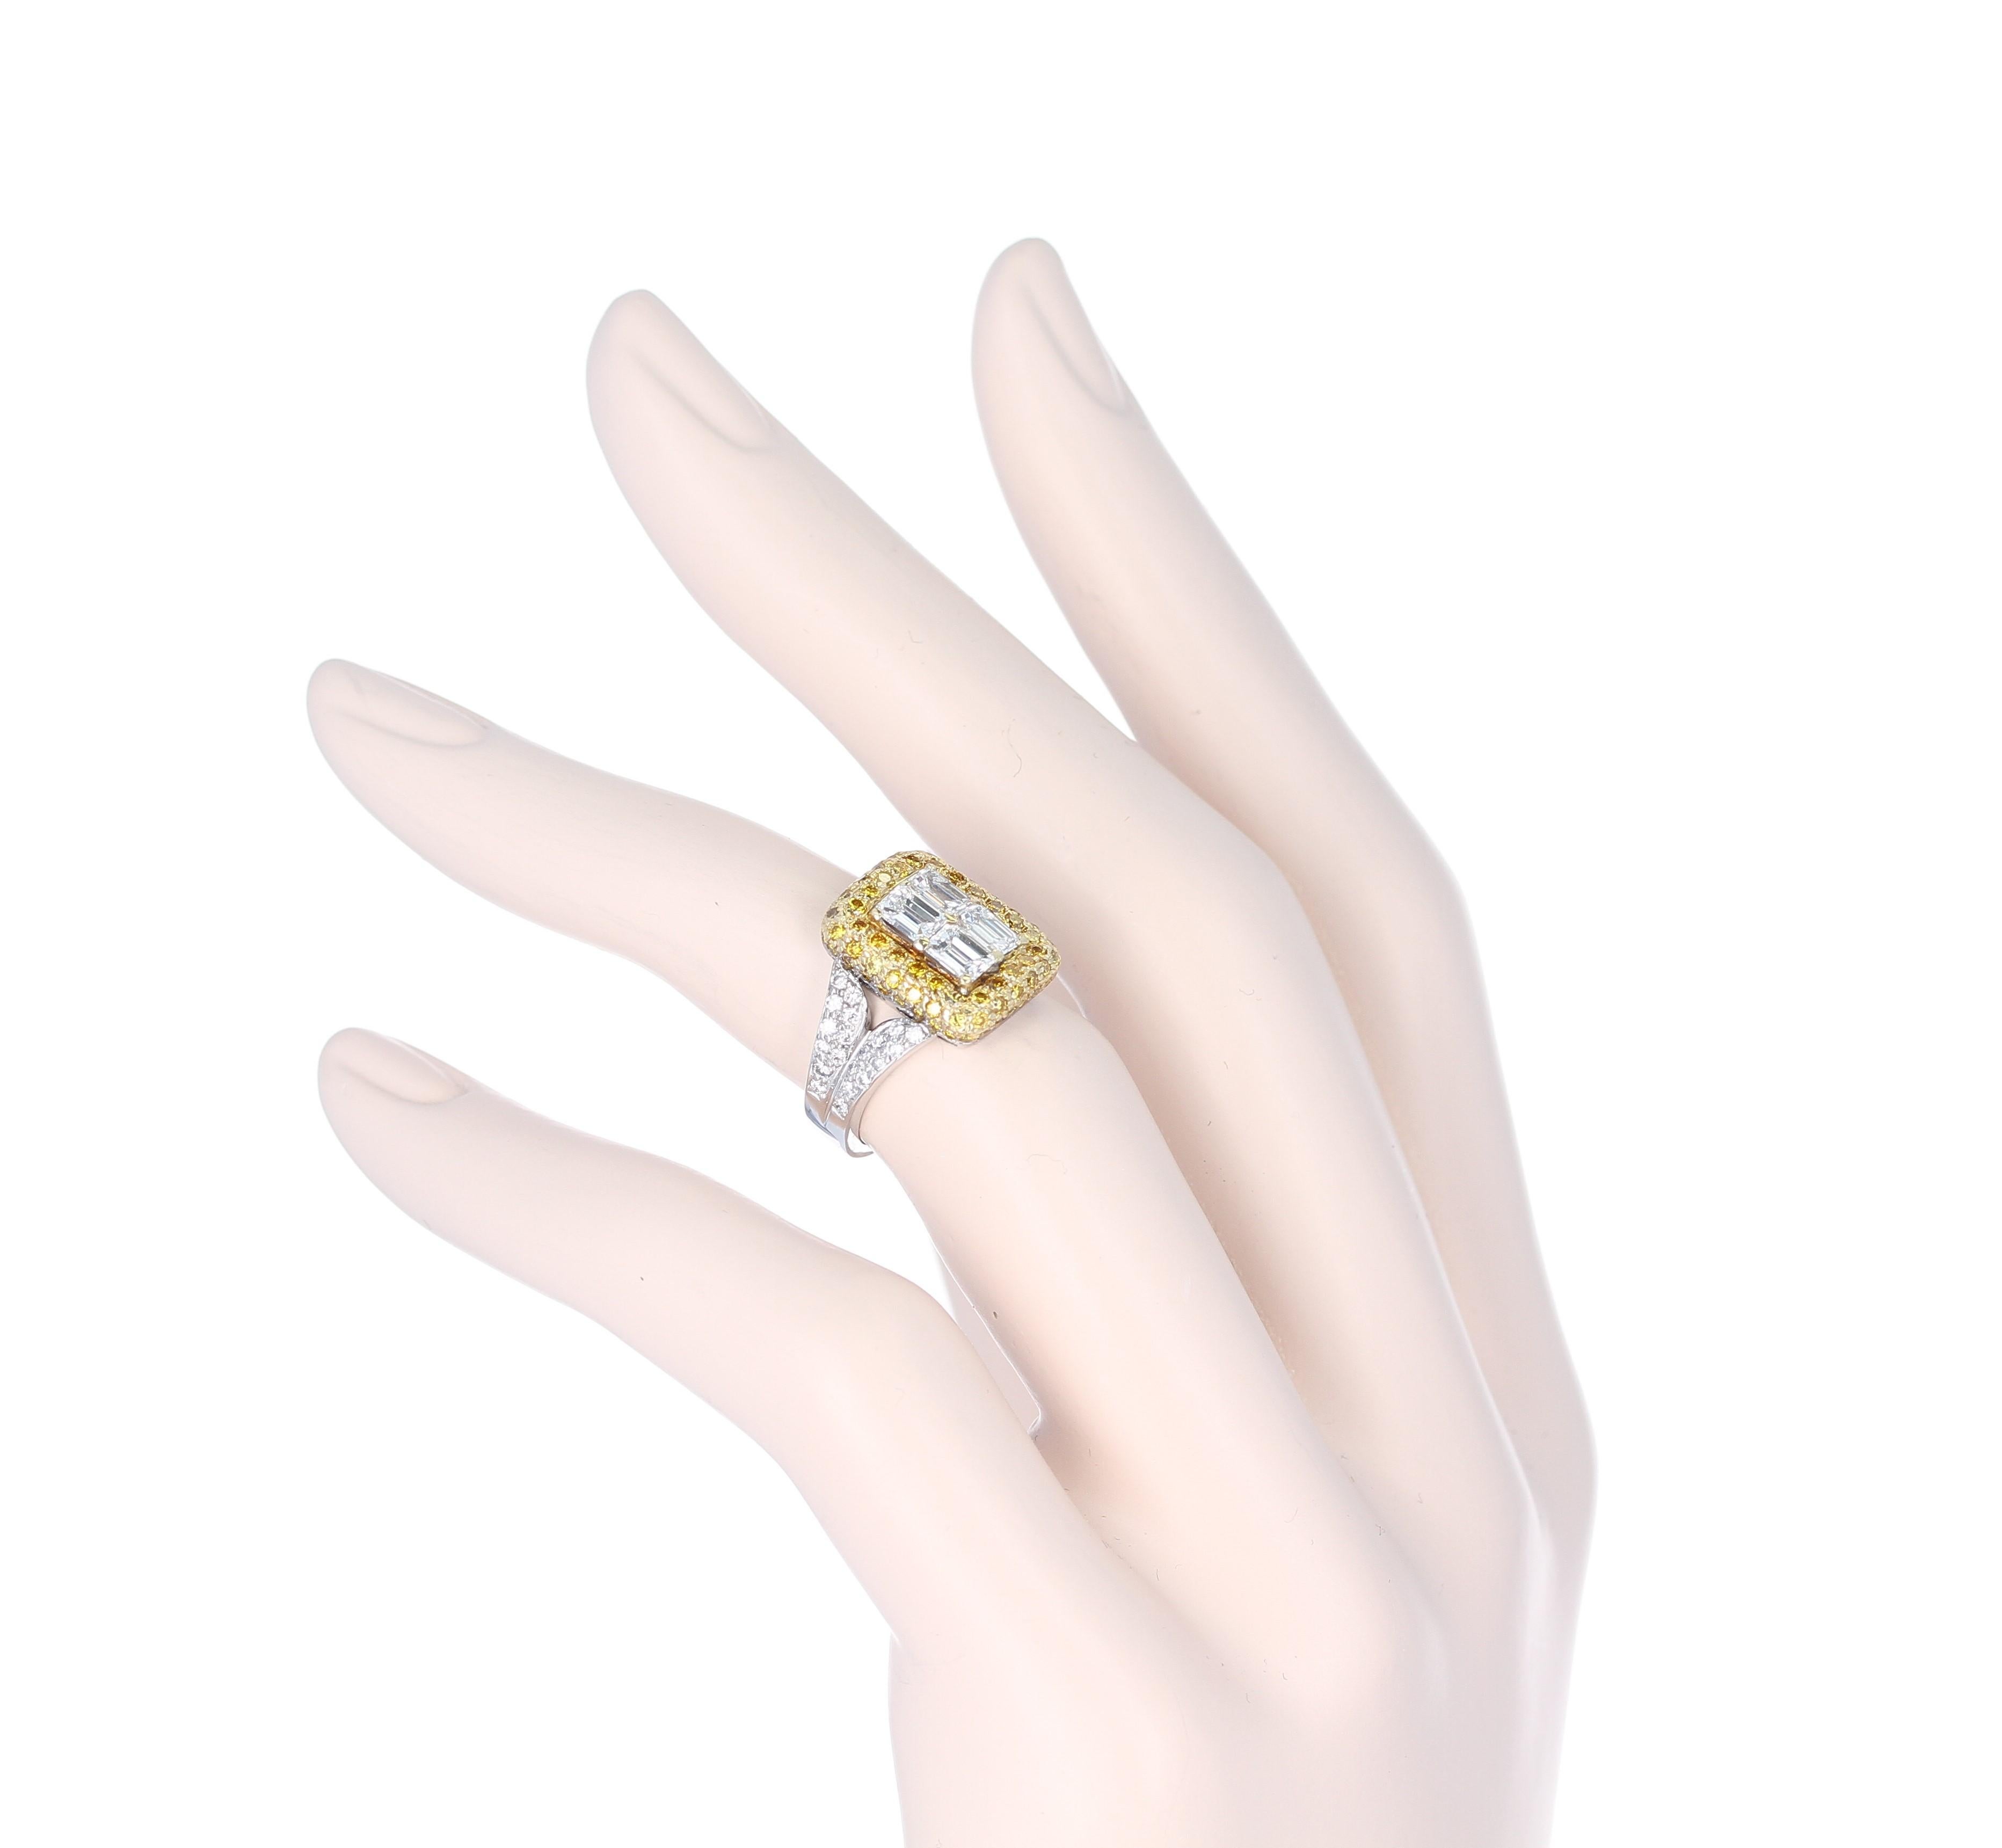 Emerald-Cut Diamond Engagement Ring with Pave Yellow Diamonds and White Diamonds For Sale 2